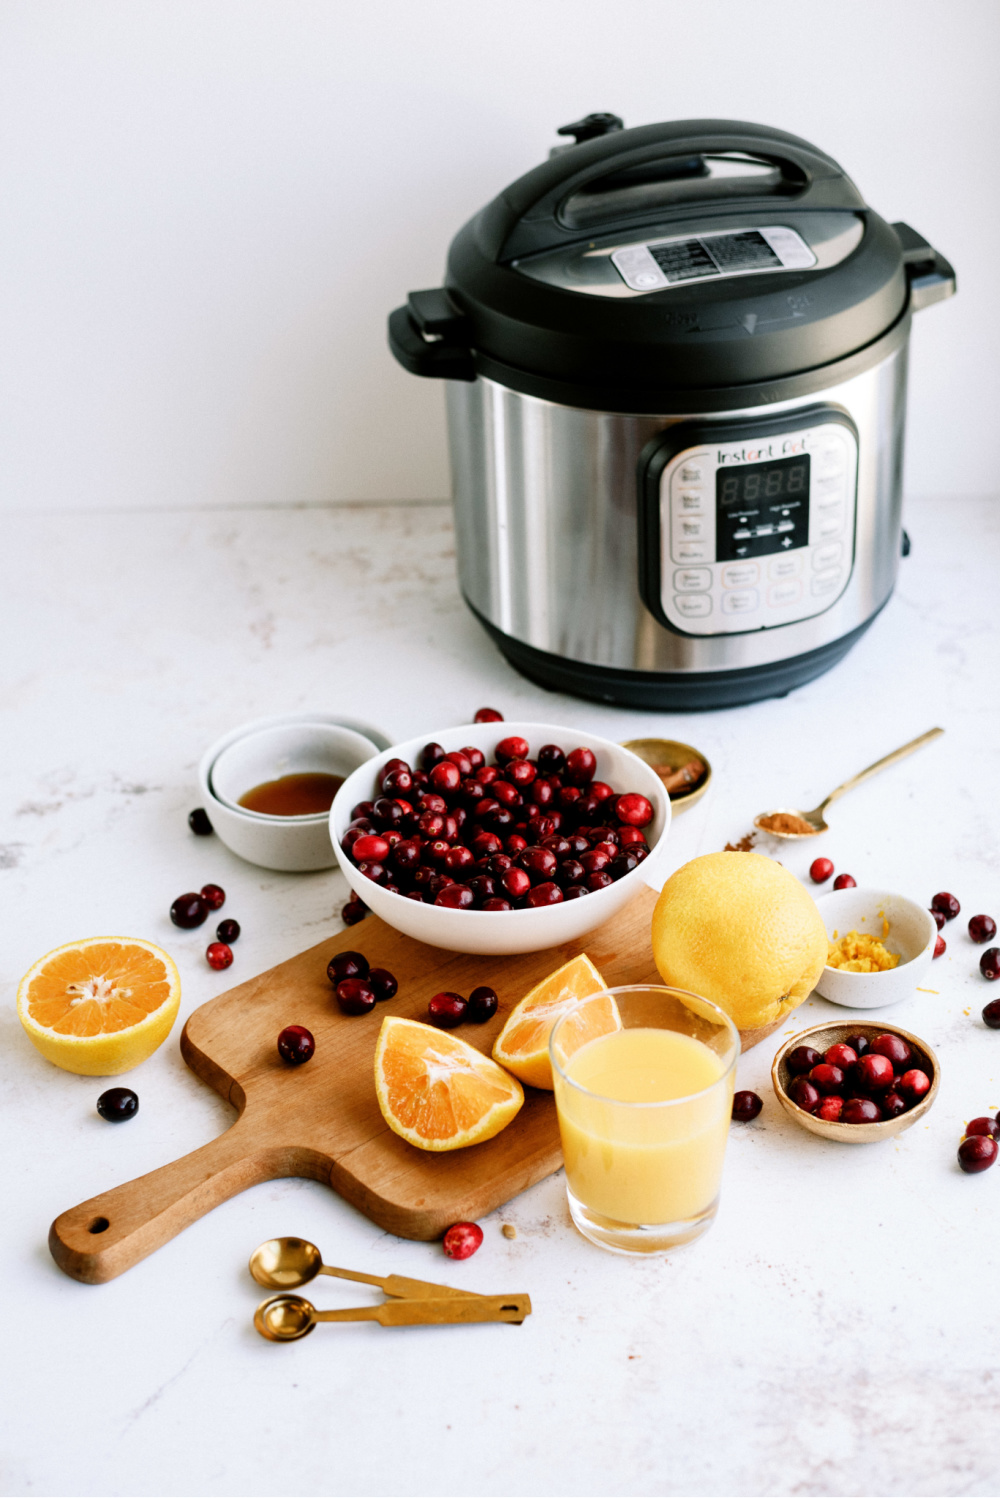 ingredients needed for making cranberry sauce in an instant pot